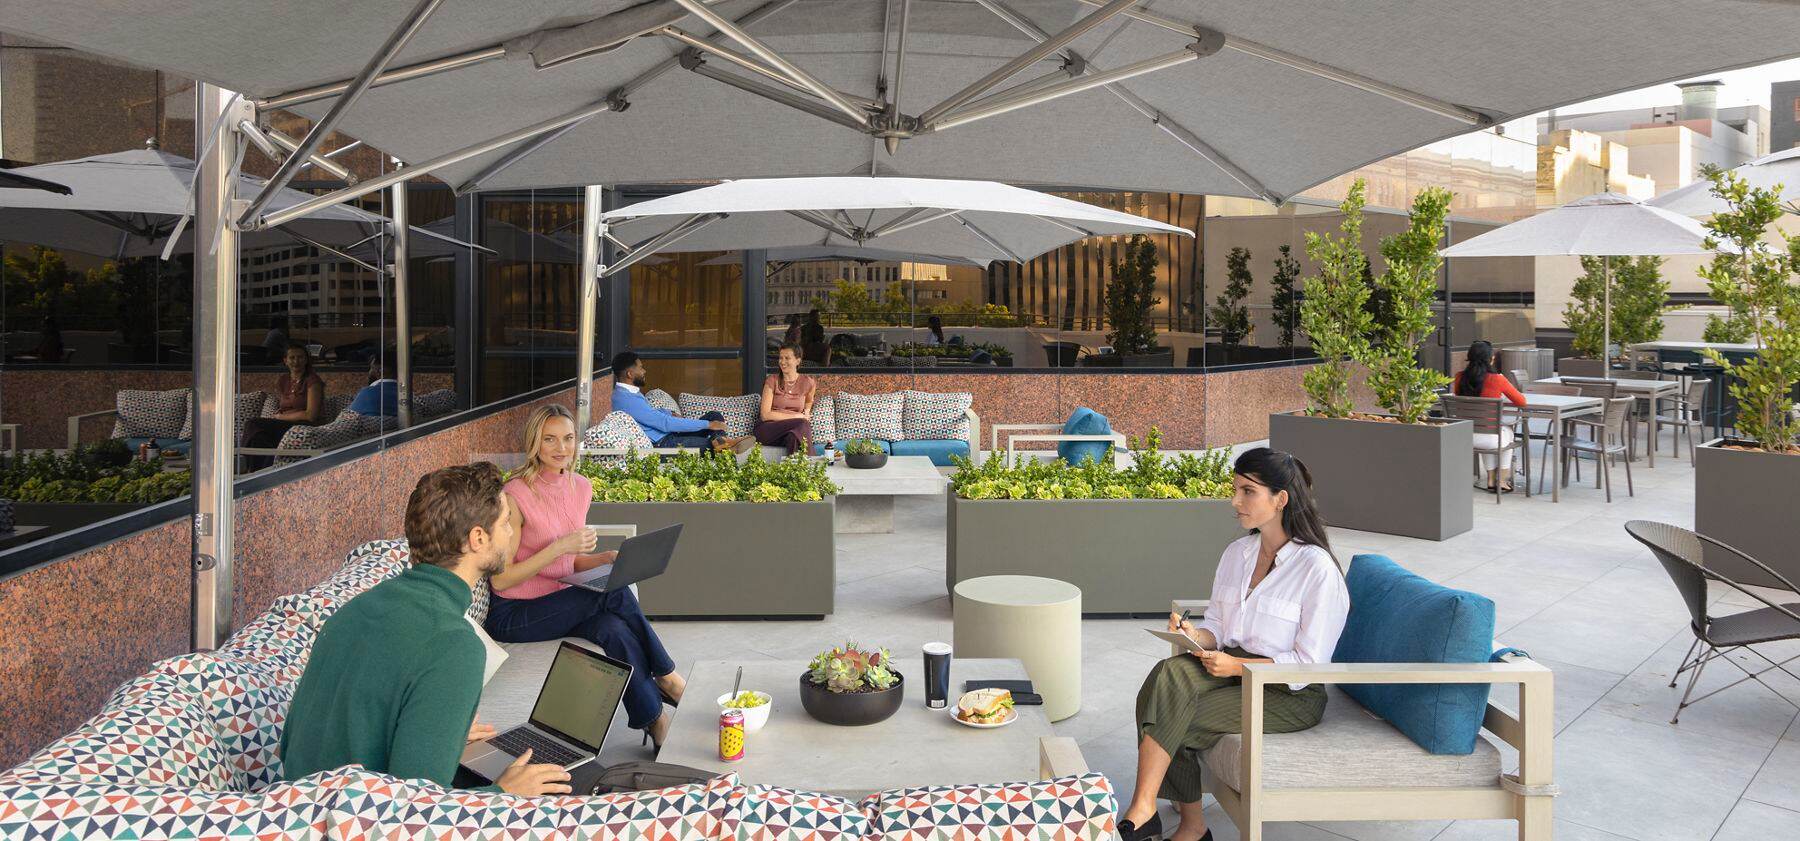 Exterior lifestyle photography of the outdoor workspace at Wells Fargo Plaza in San Diego, CA.